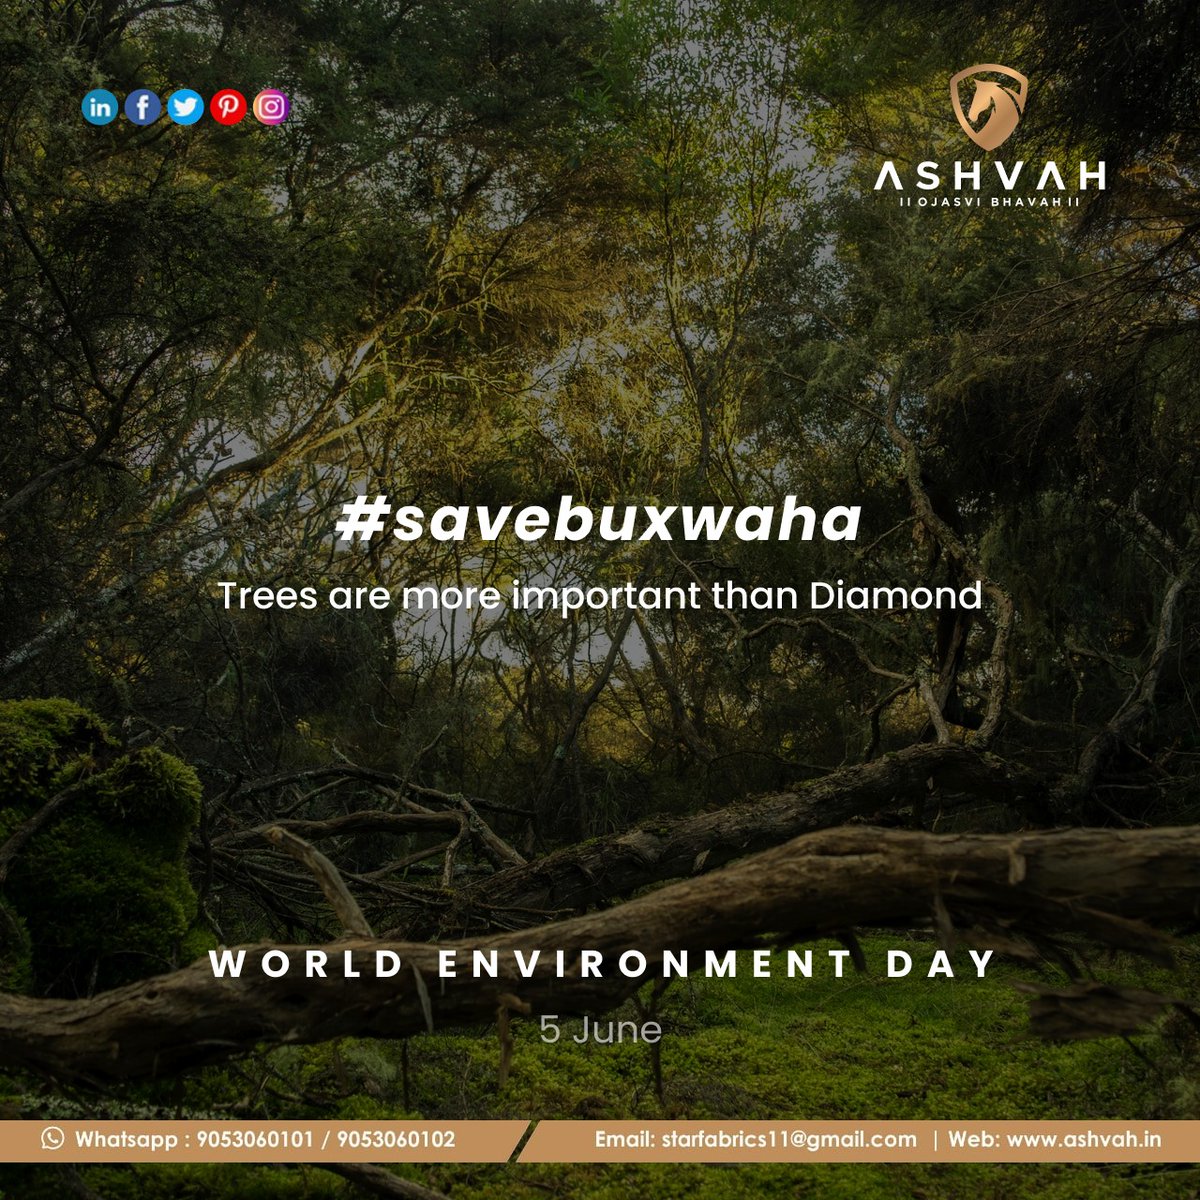 Earth is like our home and we must make efforts to keep it clean and green. On the occasion of World Environment Day, let us promise to make it a better place to live!
#savebuxwahaforest 
#worldenvironmentday #environment #nature #worldenvironmentday2022 #environmentday #gogreen